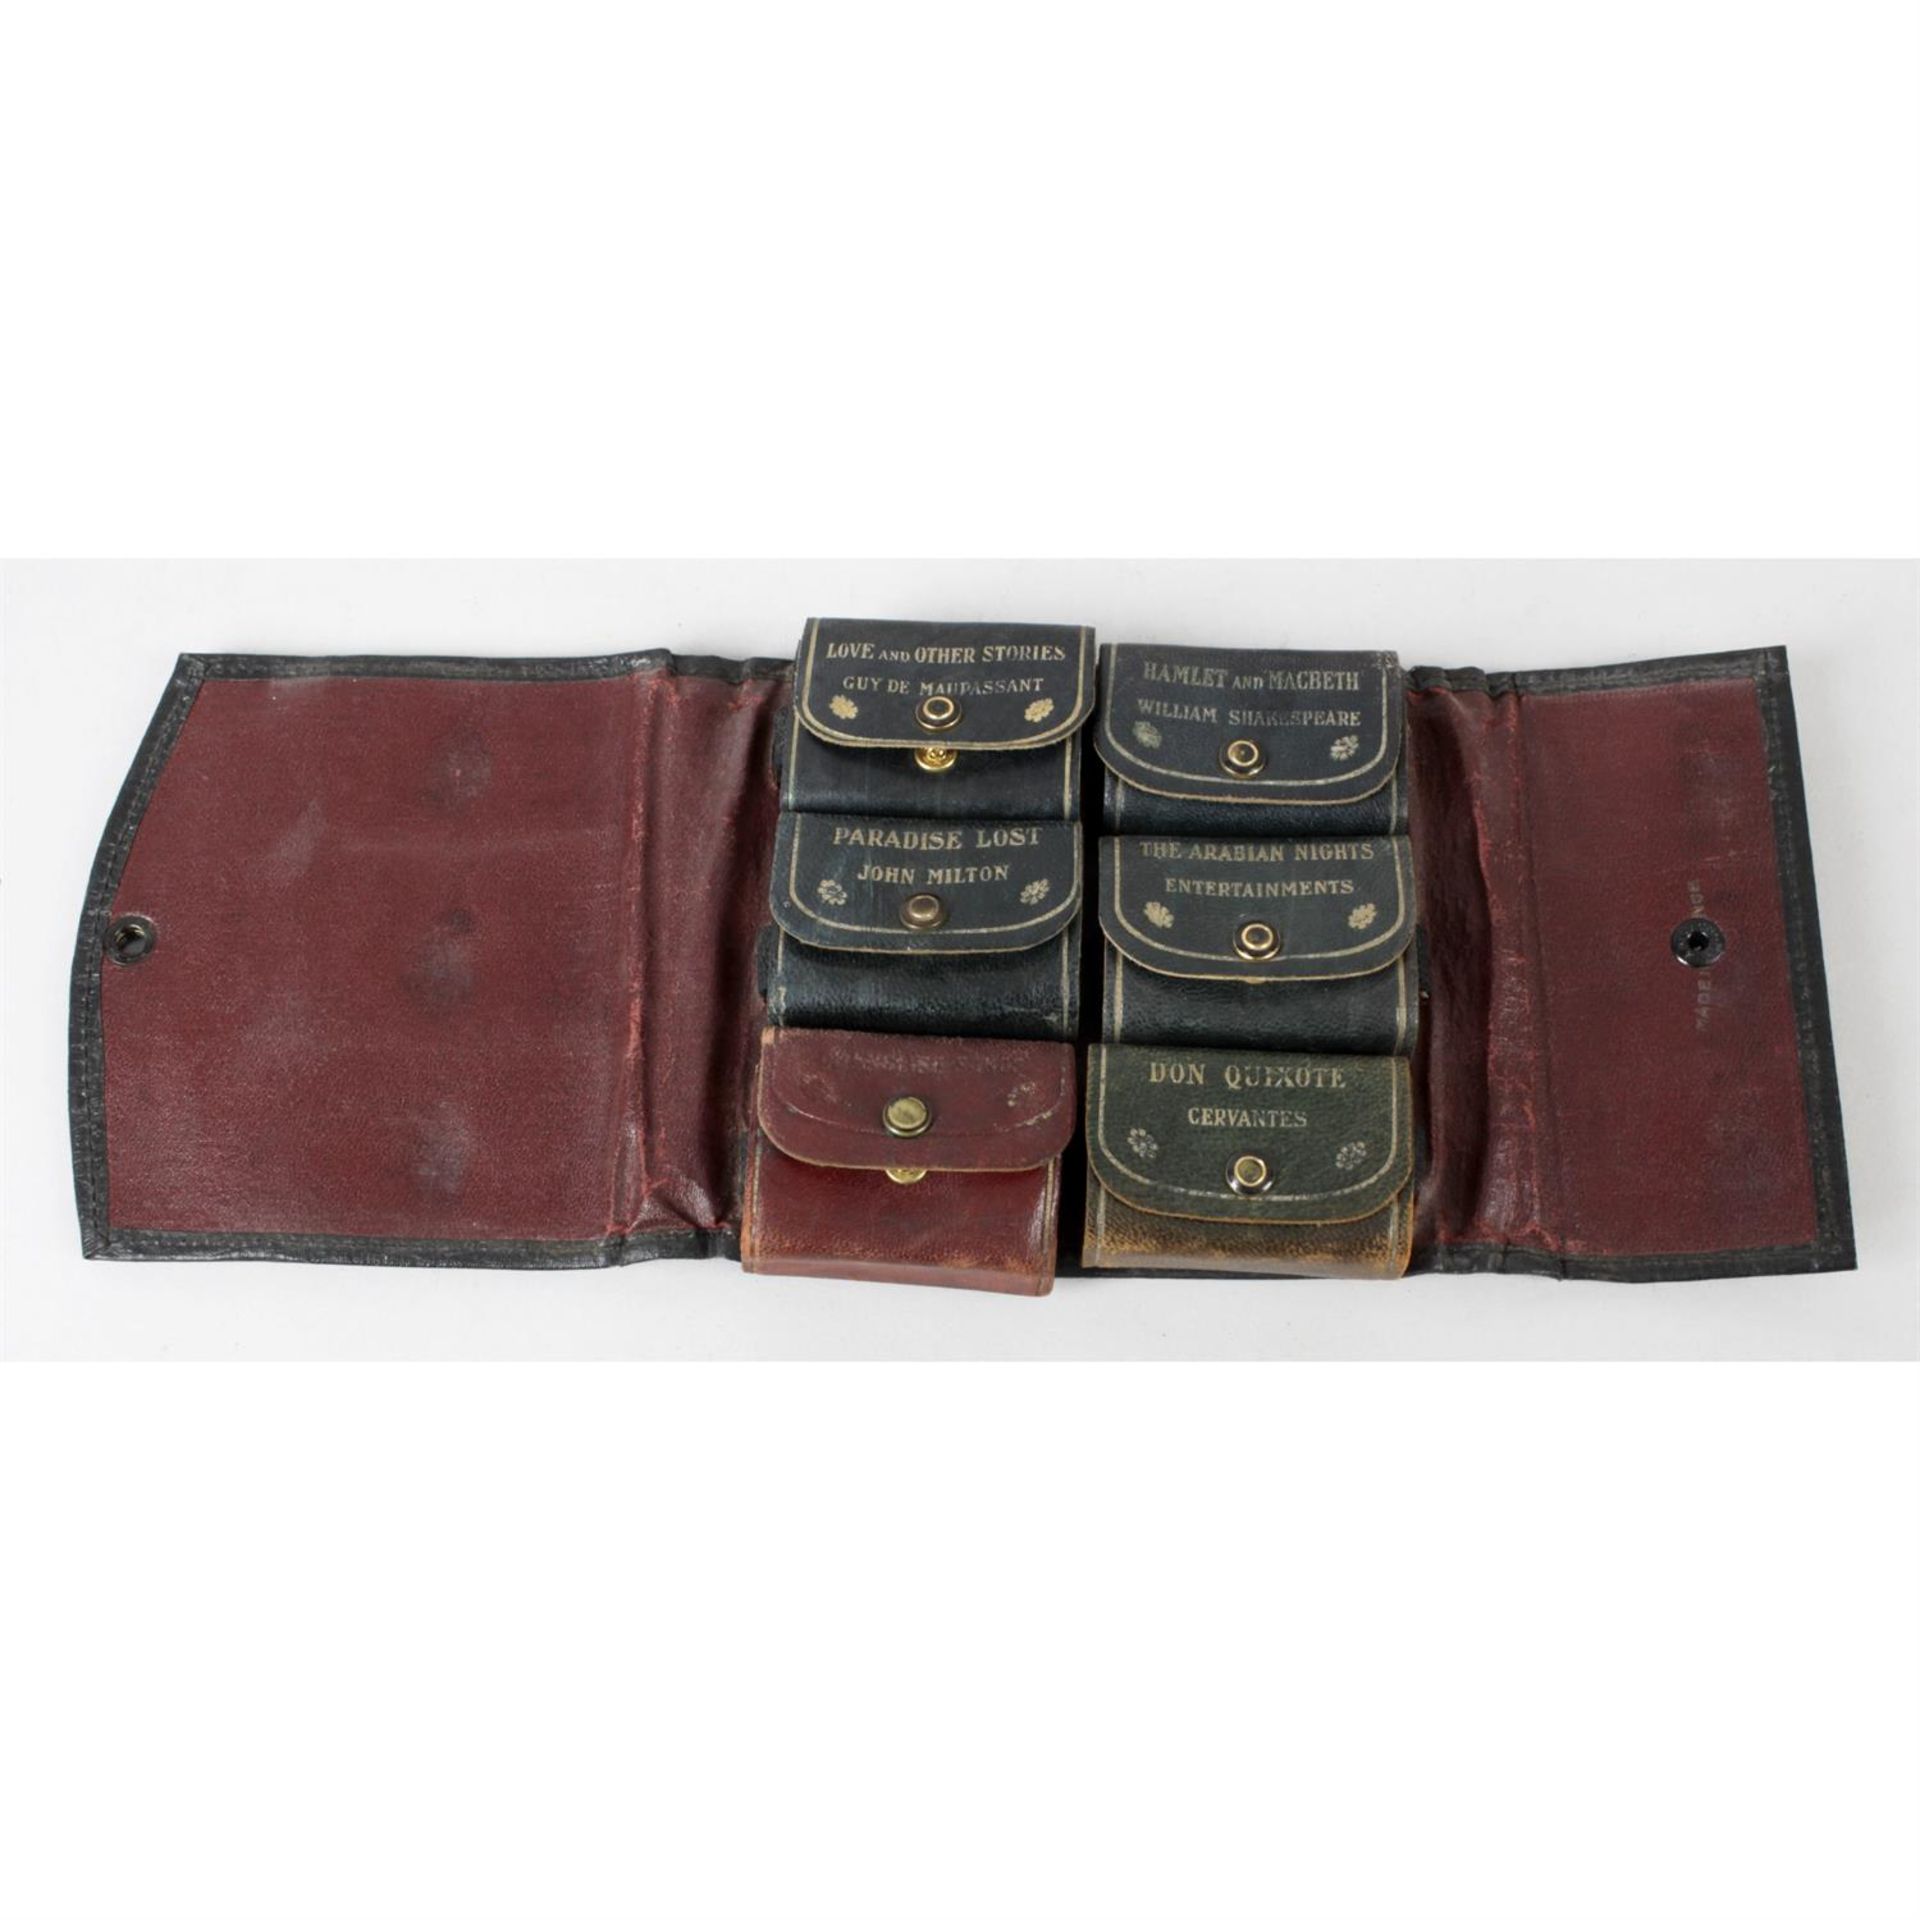 An unusual late 19th/early 20th century black faux leather pouch.